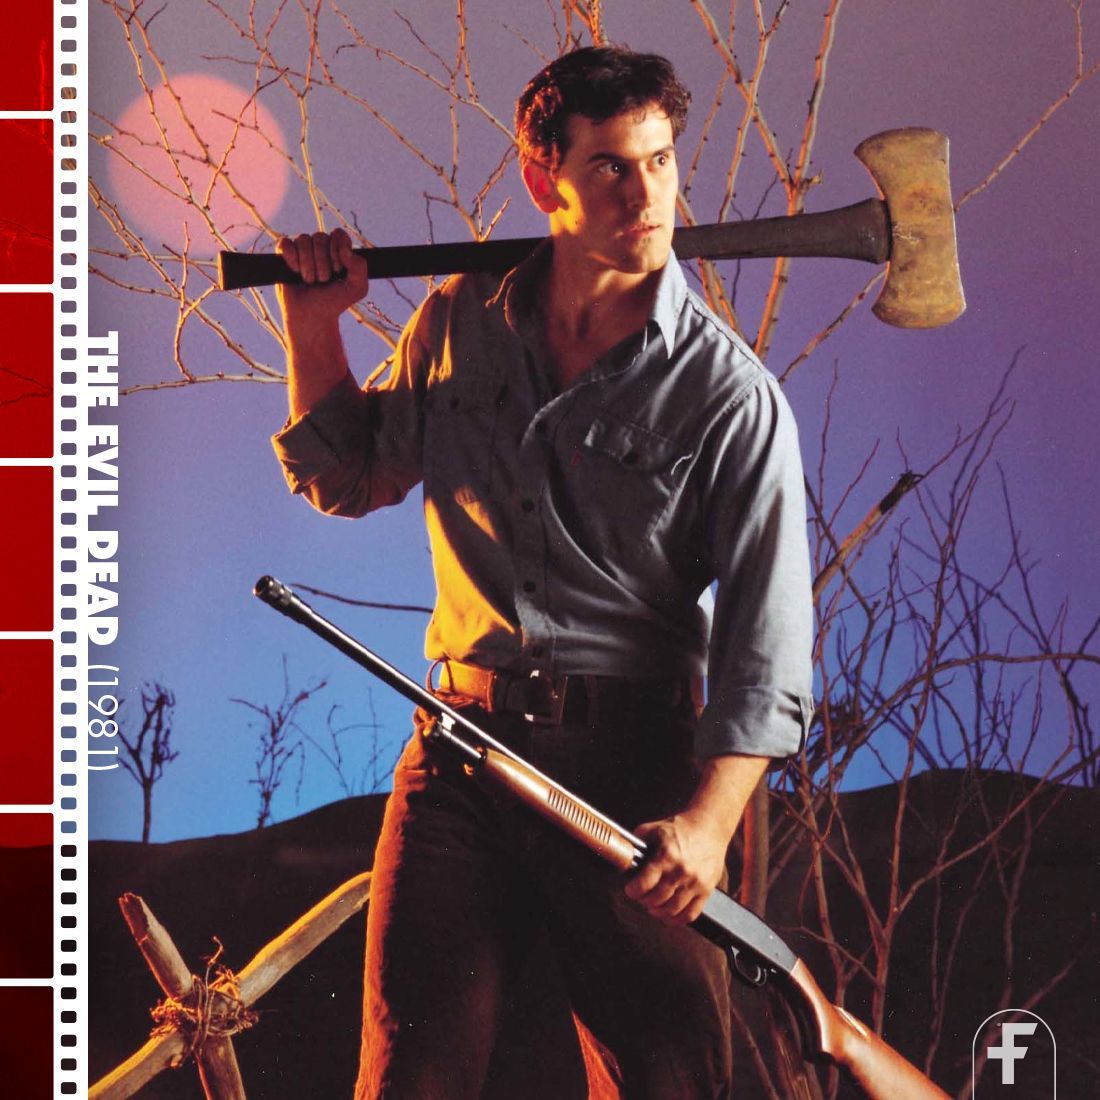 EvilDeadTheGame on X: Evil Dead: The Game will be releasing in February  2022 Hey groovy gamers, we're targeting a new release date to give the team  some extra time for polish and